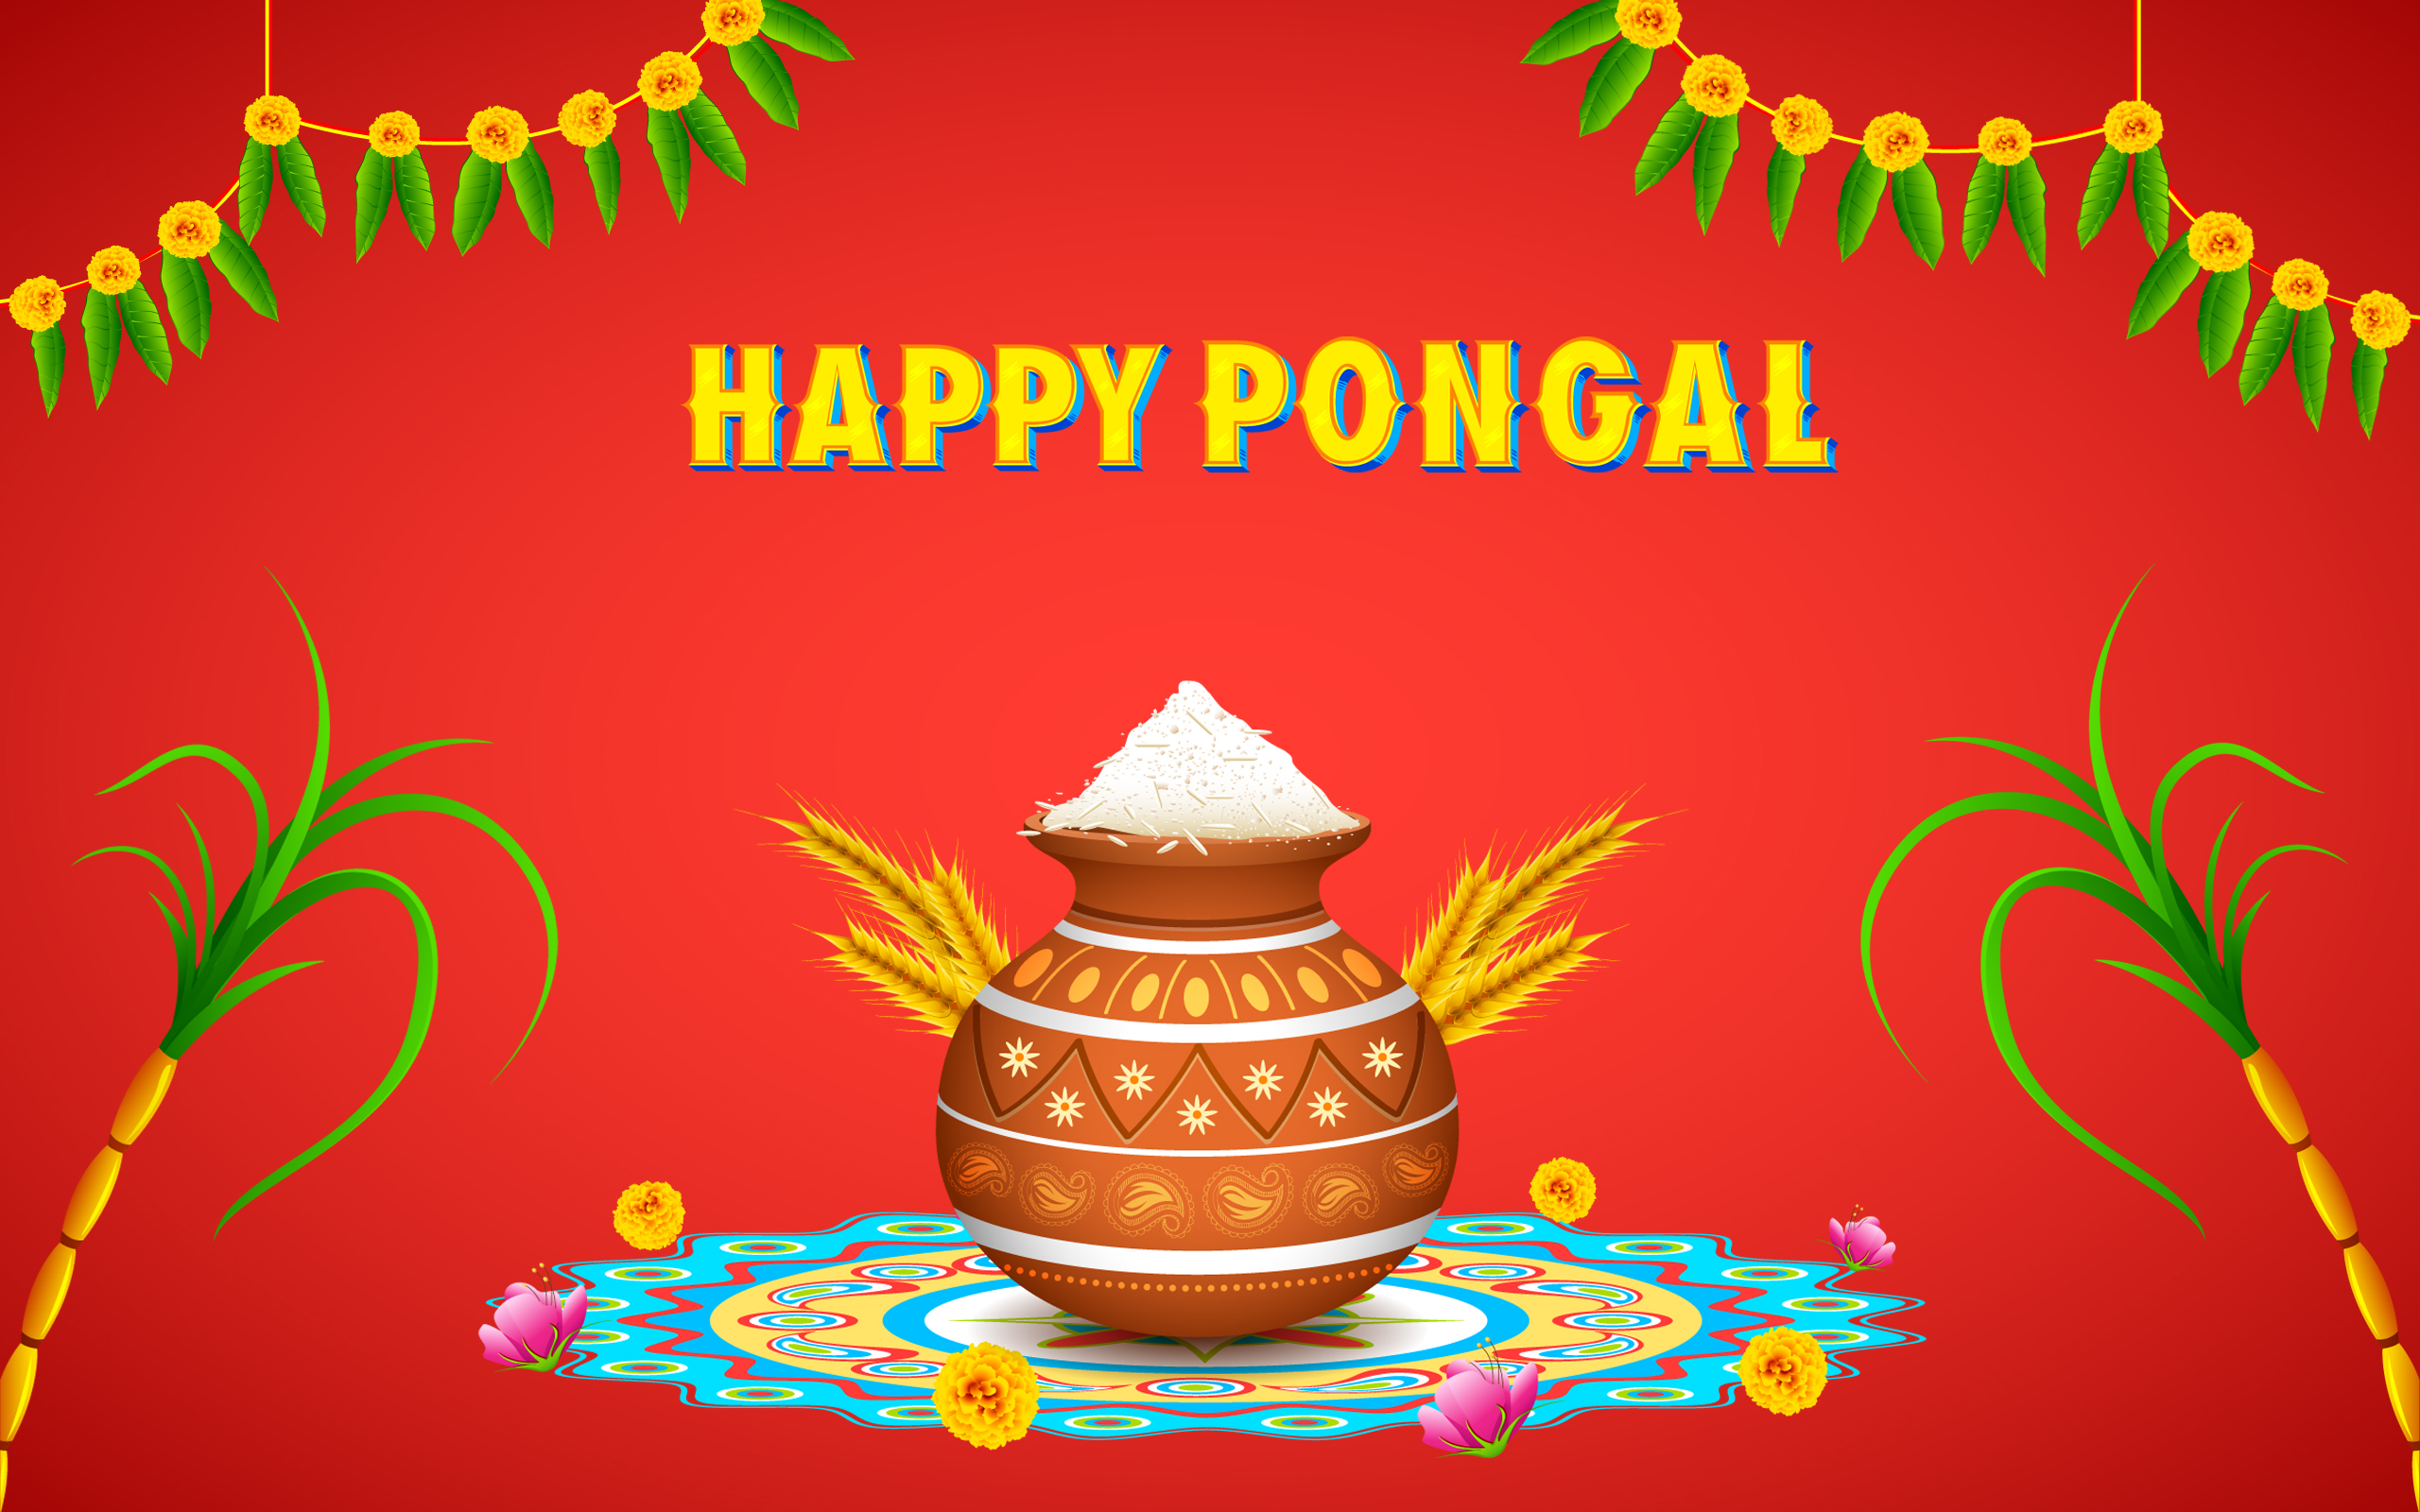 Happy Pongal Wallpaper Picture Image Download